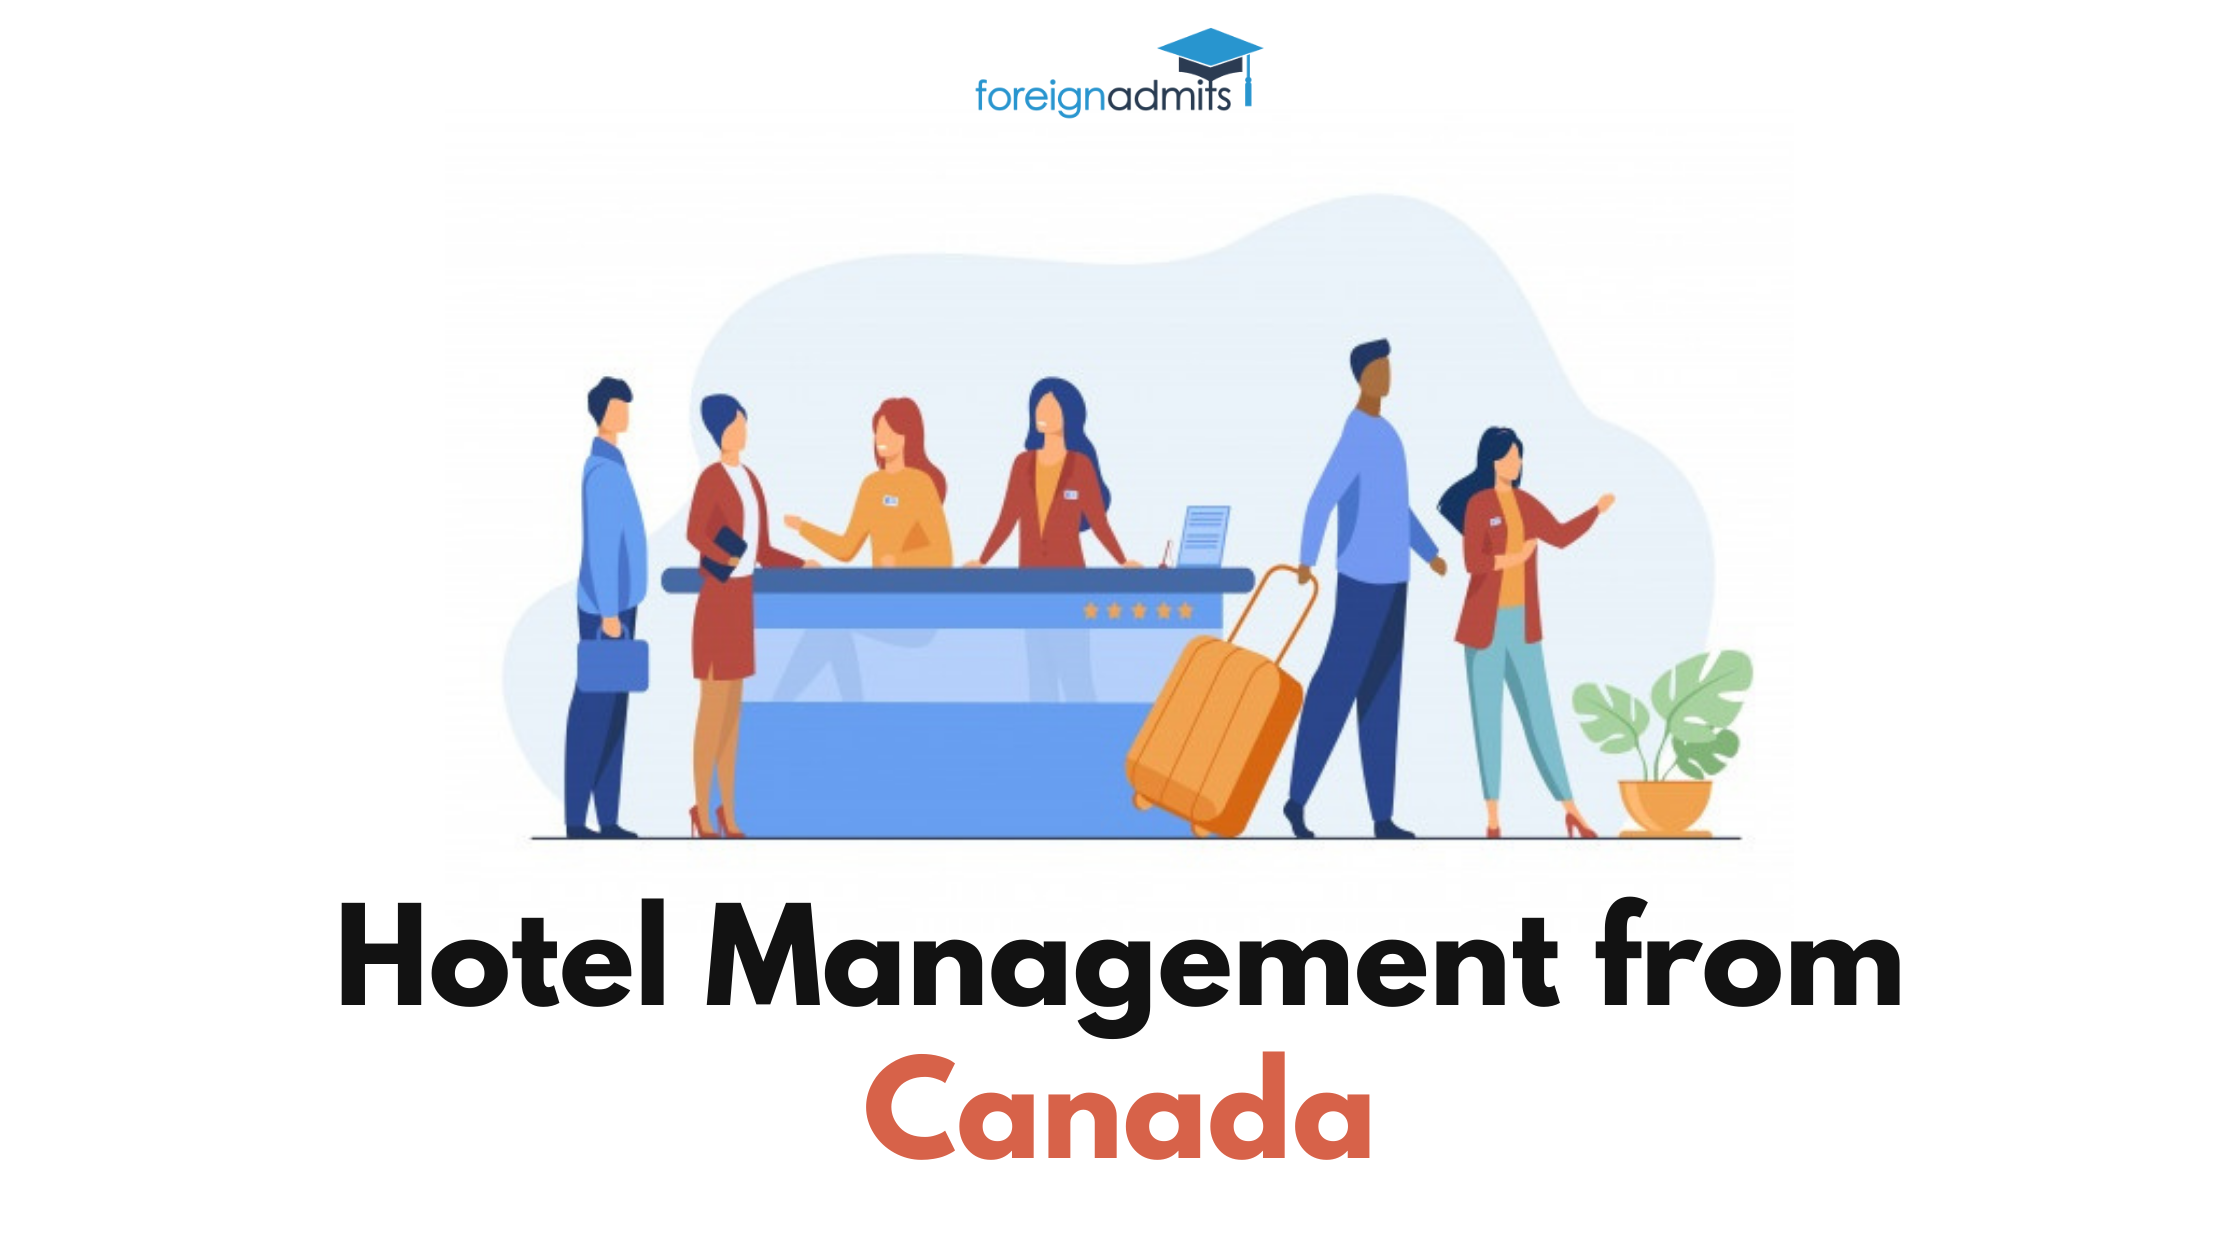 Hotel Management from Canada